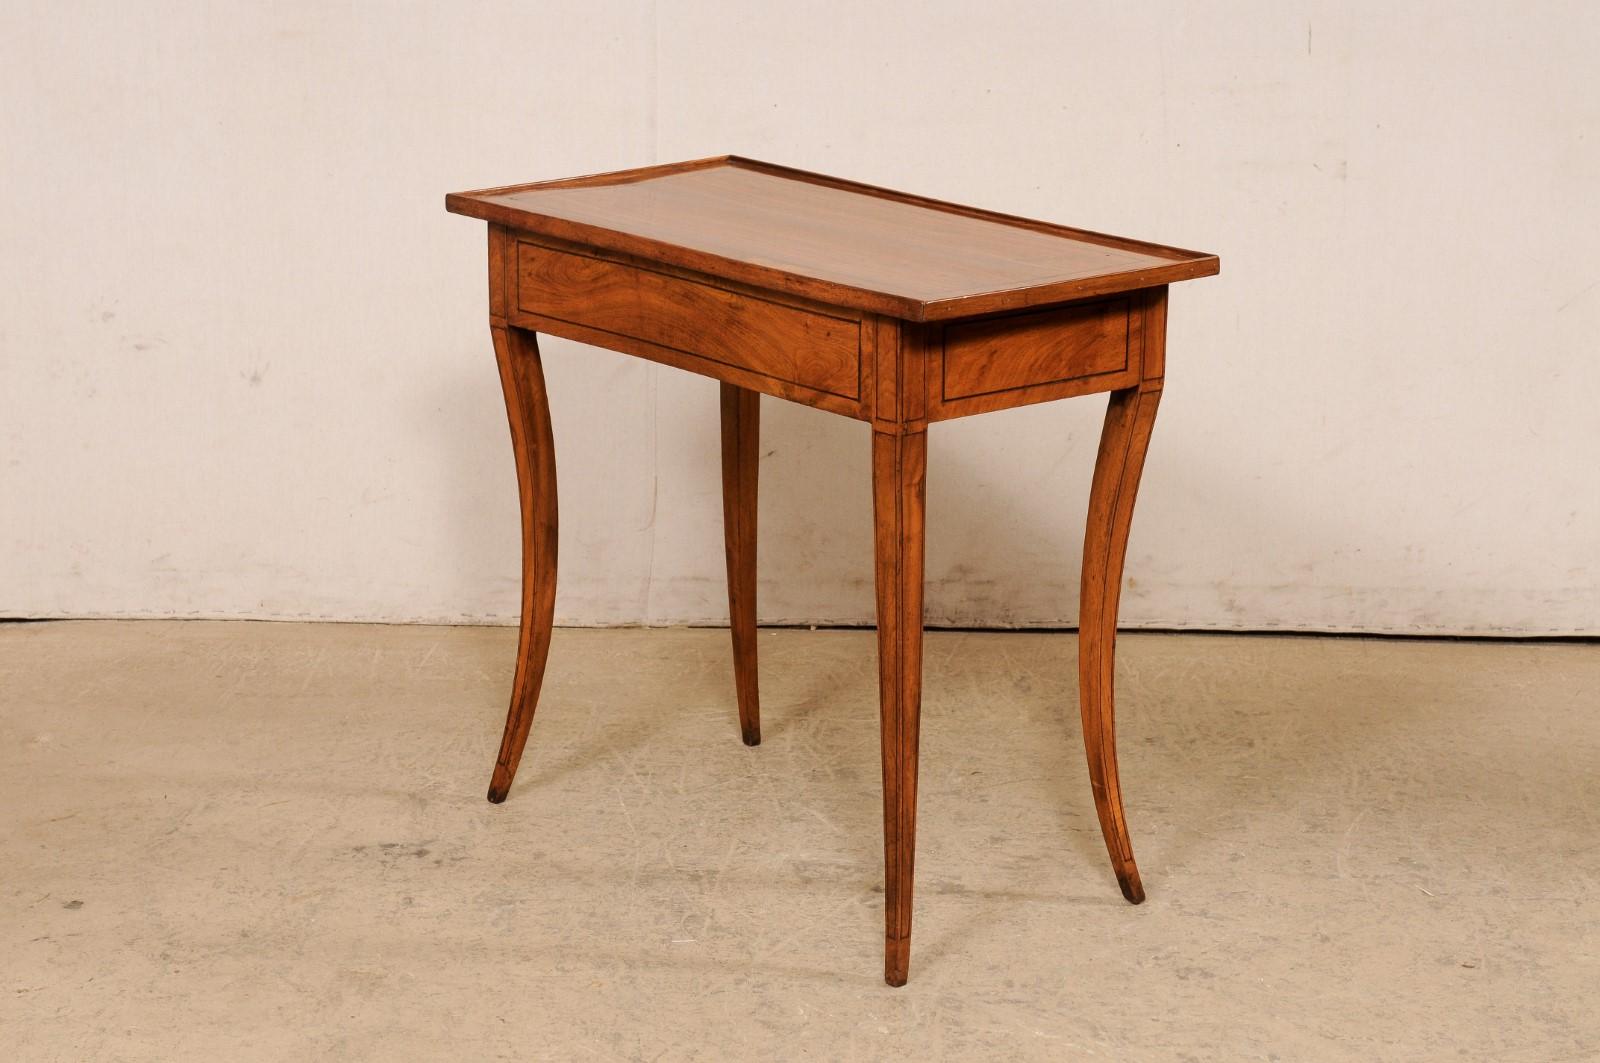 An Early 19th C. Italian Occasional Table w/Inlay Accents & Elegant Sabre Legs For Sale 2